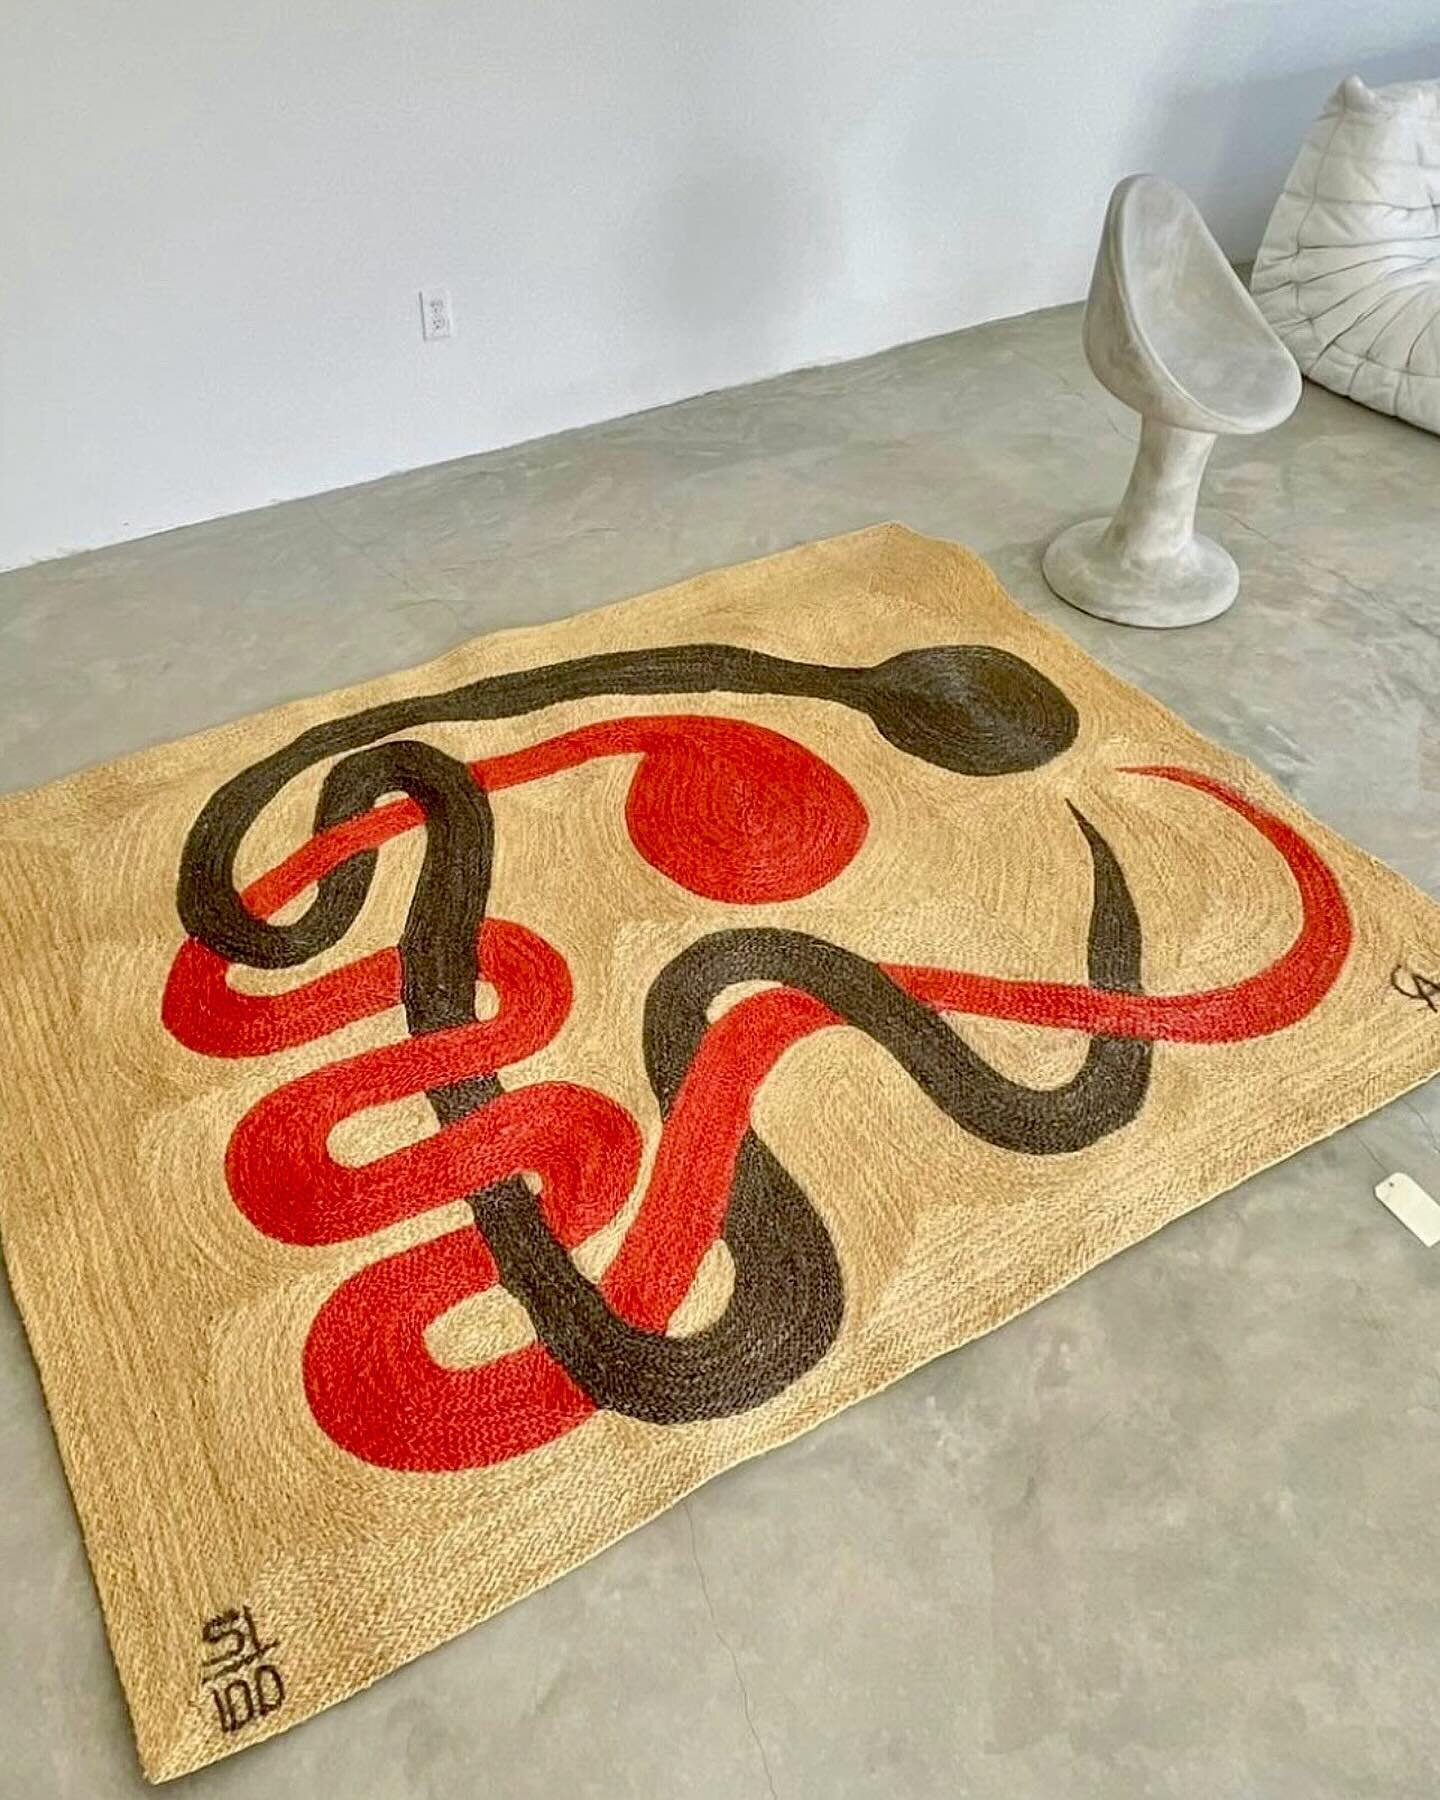 Alexander Calder Jute Tapestry, (number 51 of 100 made) 1975 Guatemala 🪡 Available from our friends at @merit_la 

Extremely rare Alexander Calder jute tapestry. Made in Guatemala in 1975. Calder drew 14 designs for a rug or tapestry and a limited e